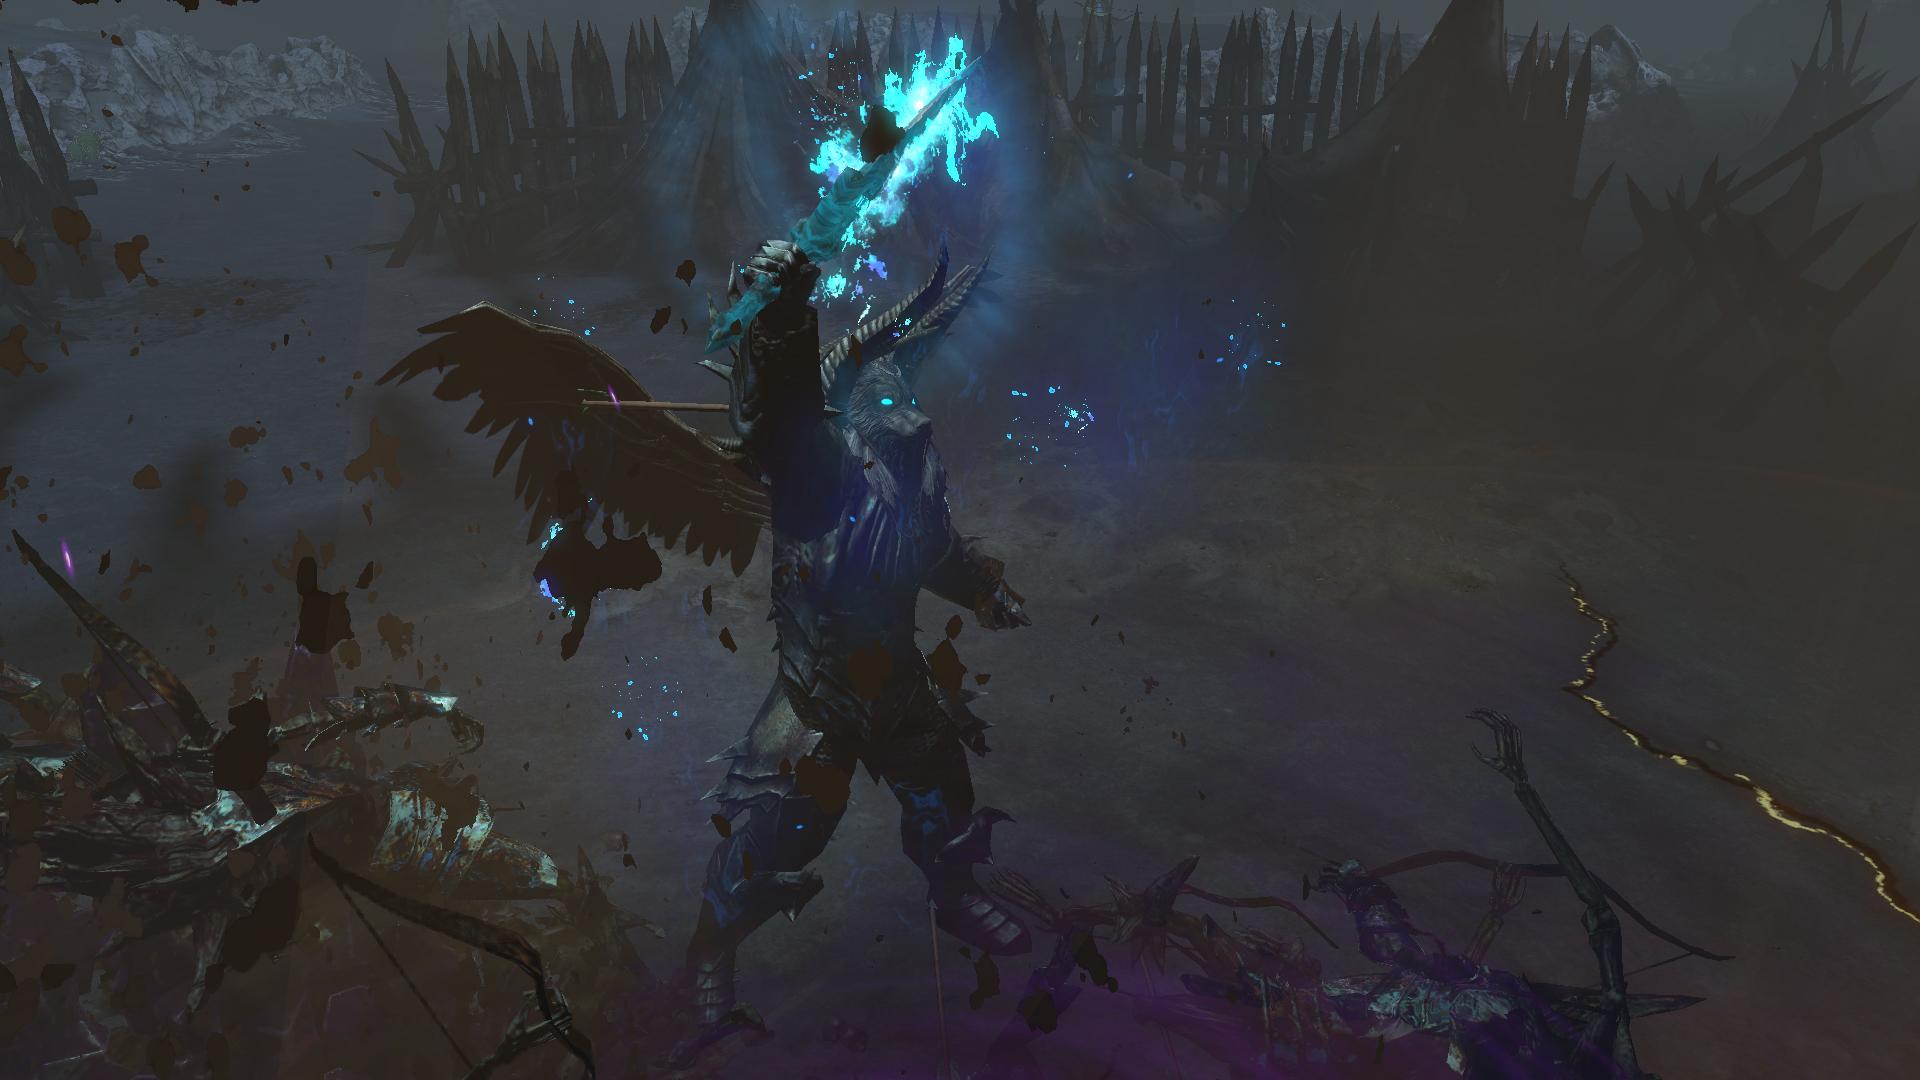 Screenshot №36 from game Path of Exile